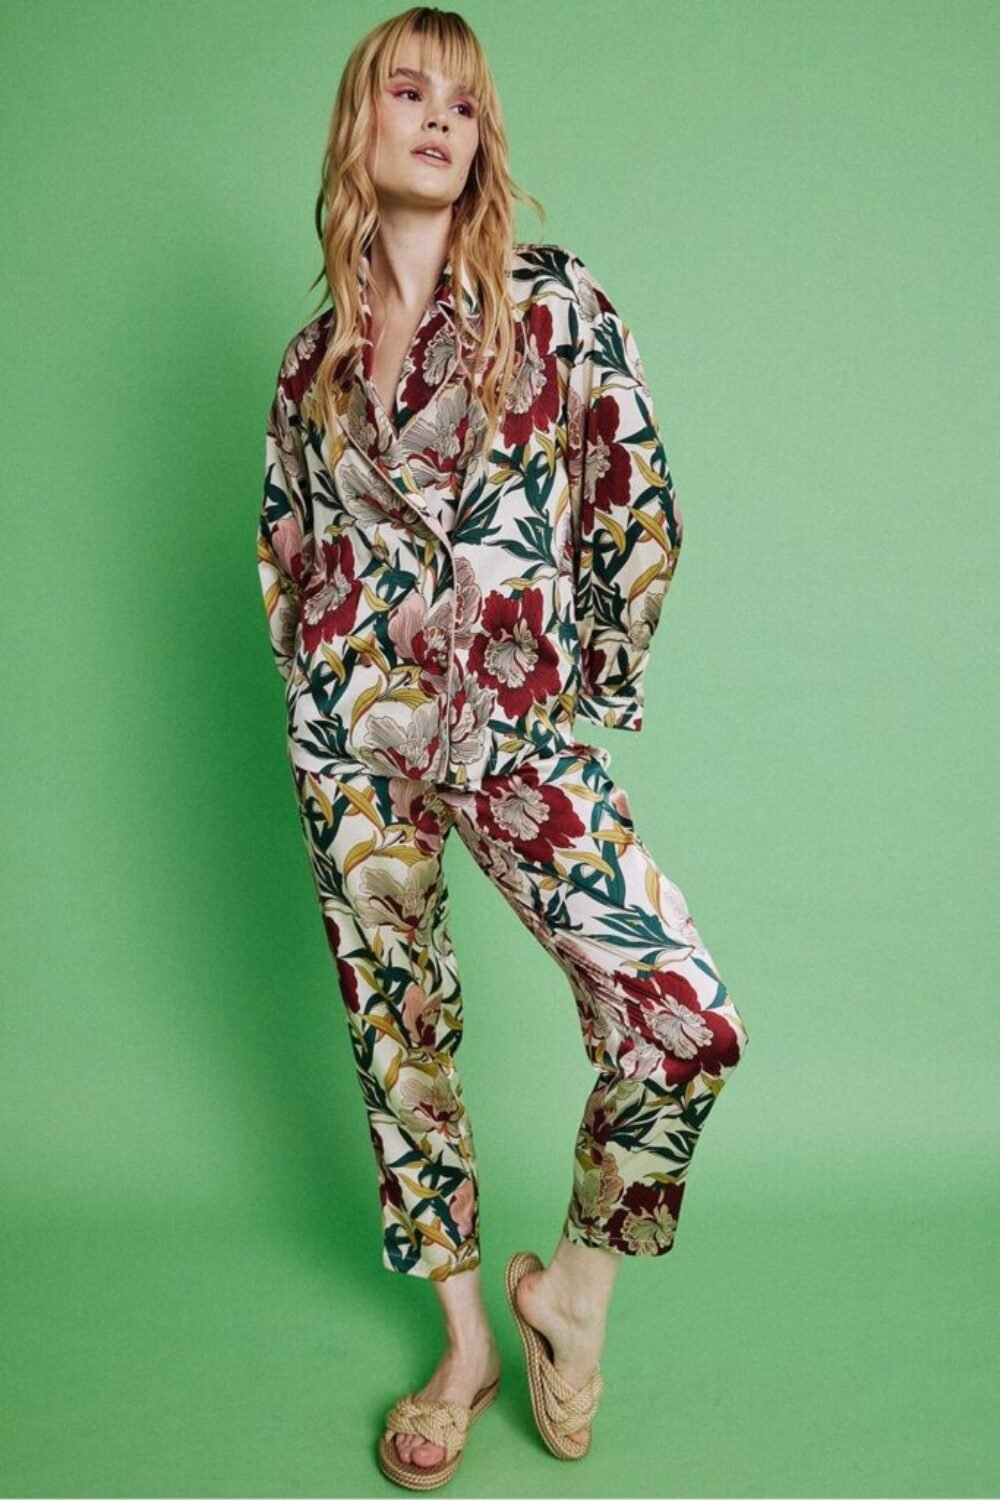 Shop Floral Silk Blend Botanical Hibiscus Print Trousers and women's luxury and designer clothes at www.lux-apparel.co.uk